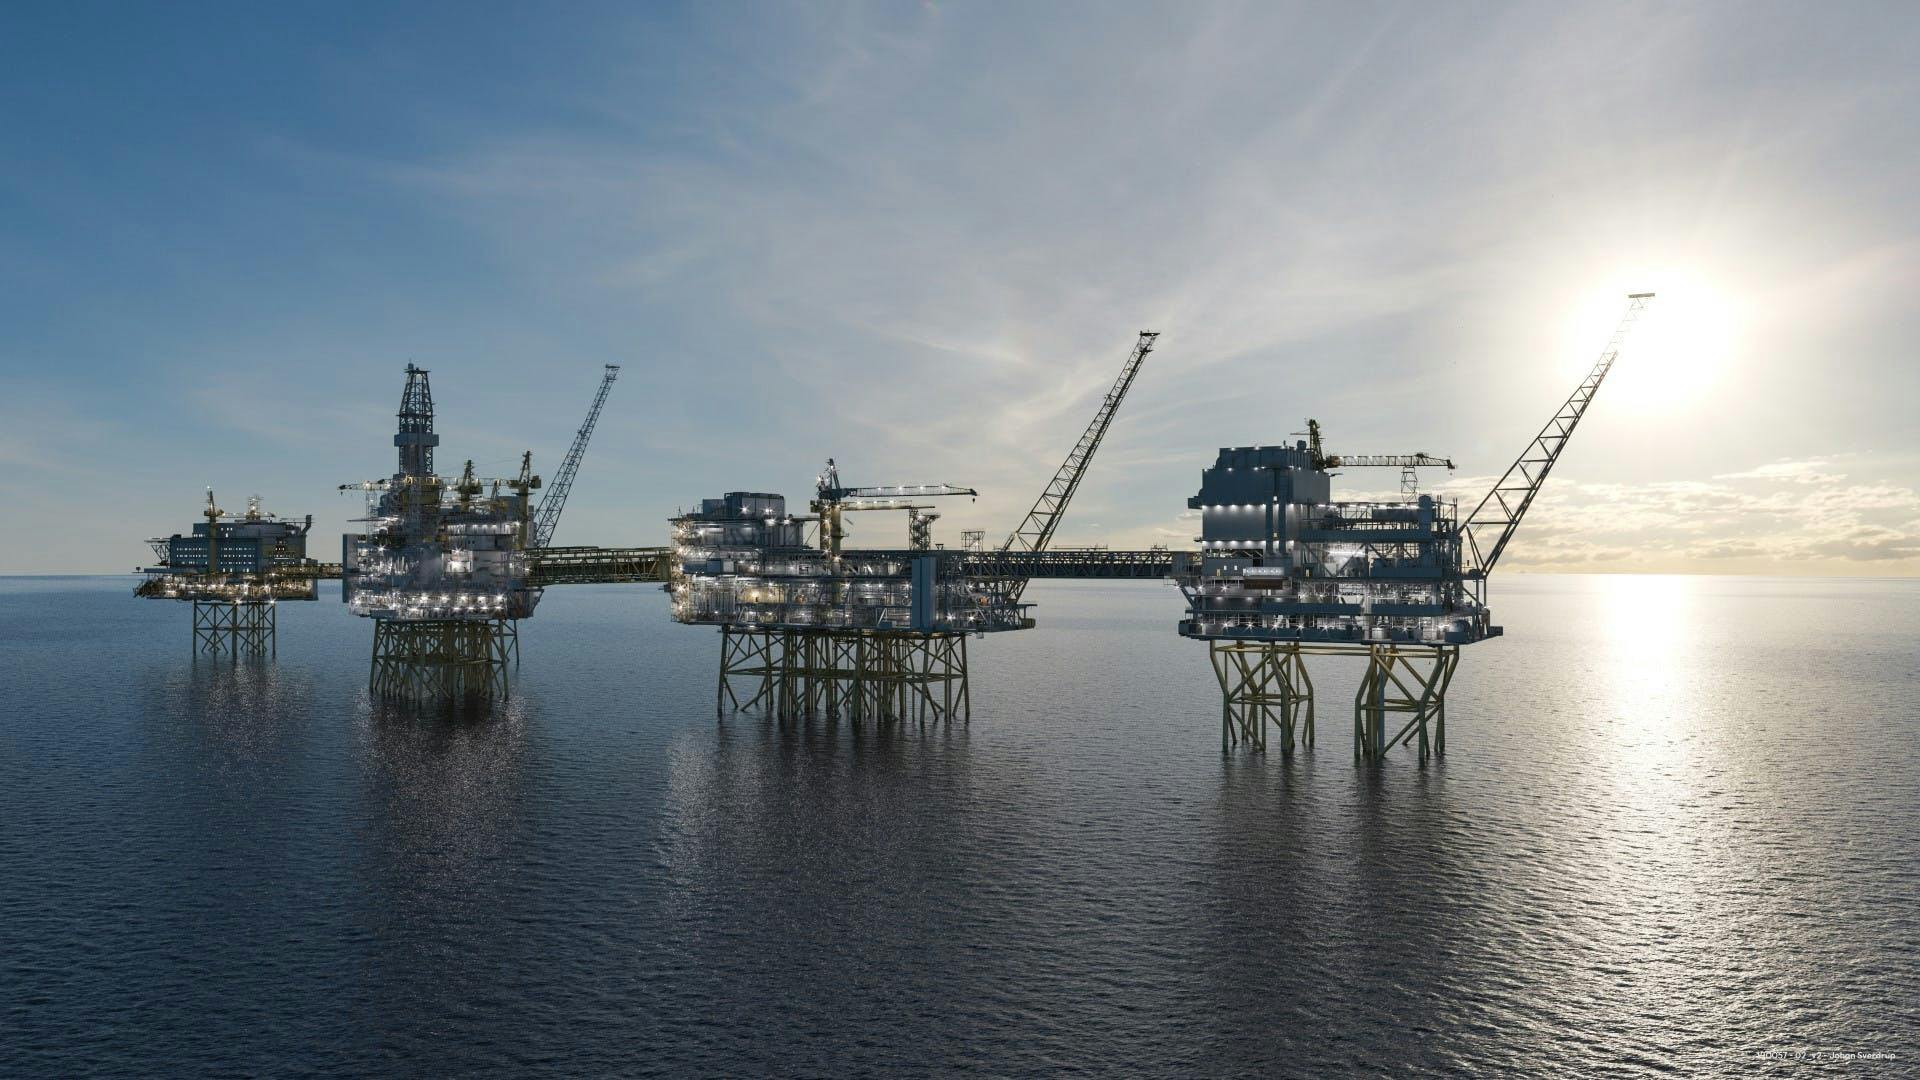 Johan Sverdrup is the third largest oil field on the Norwegian shelf, with expected resources of 2.7 Bboe, according to Aker BP.